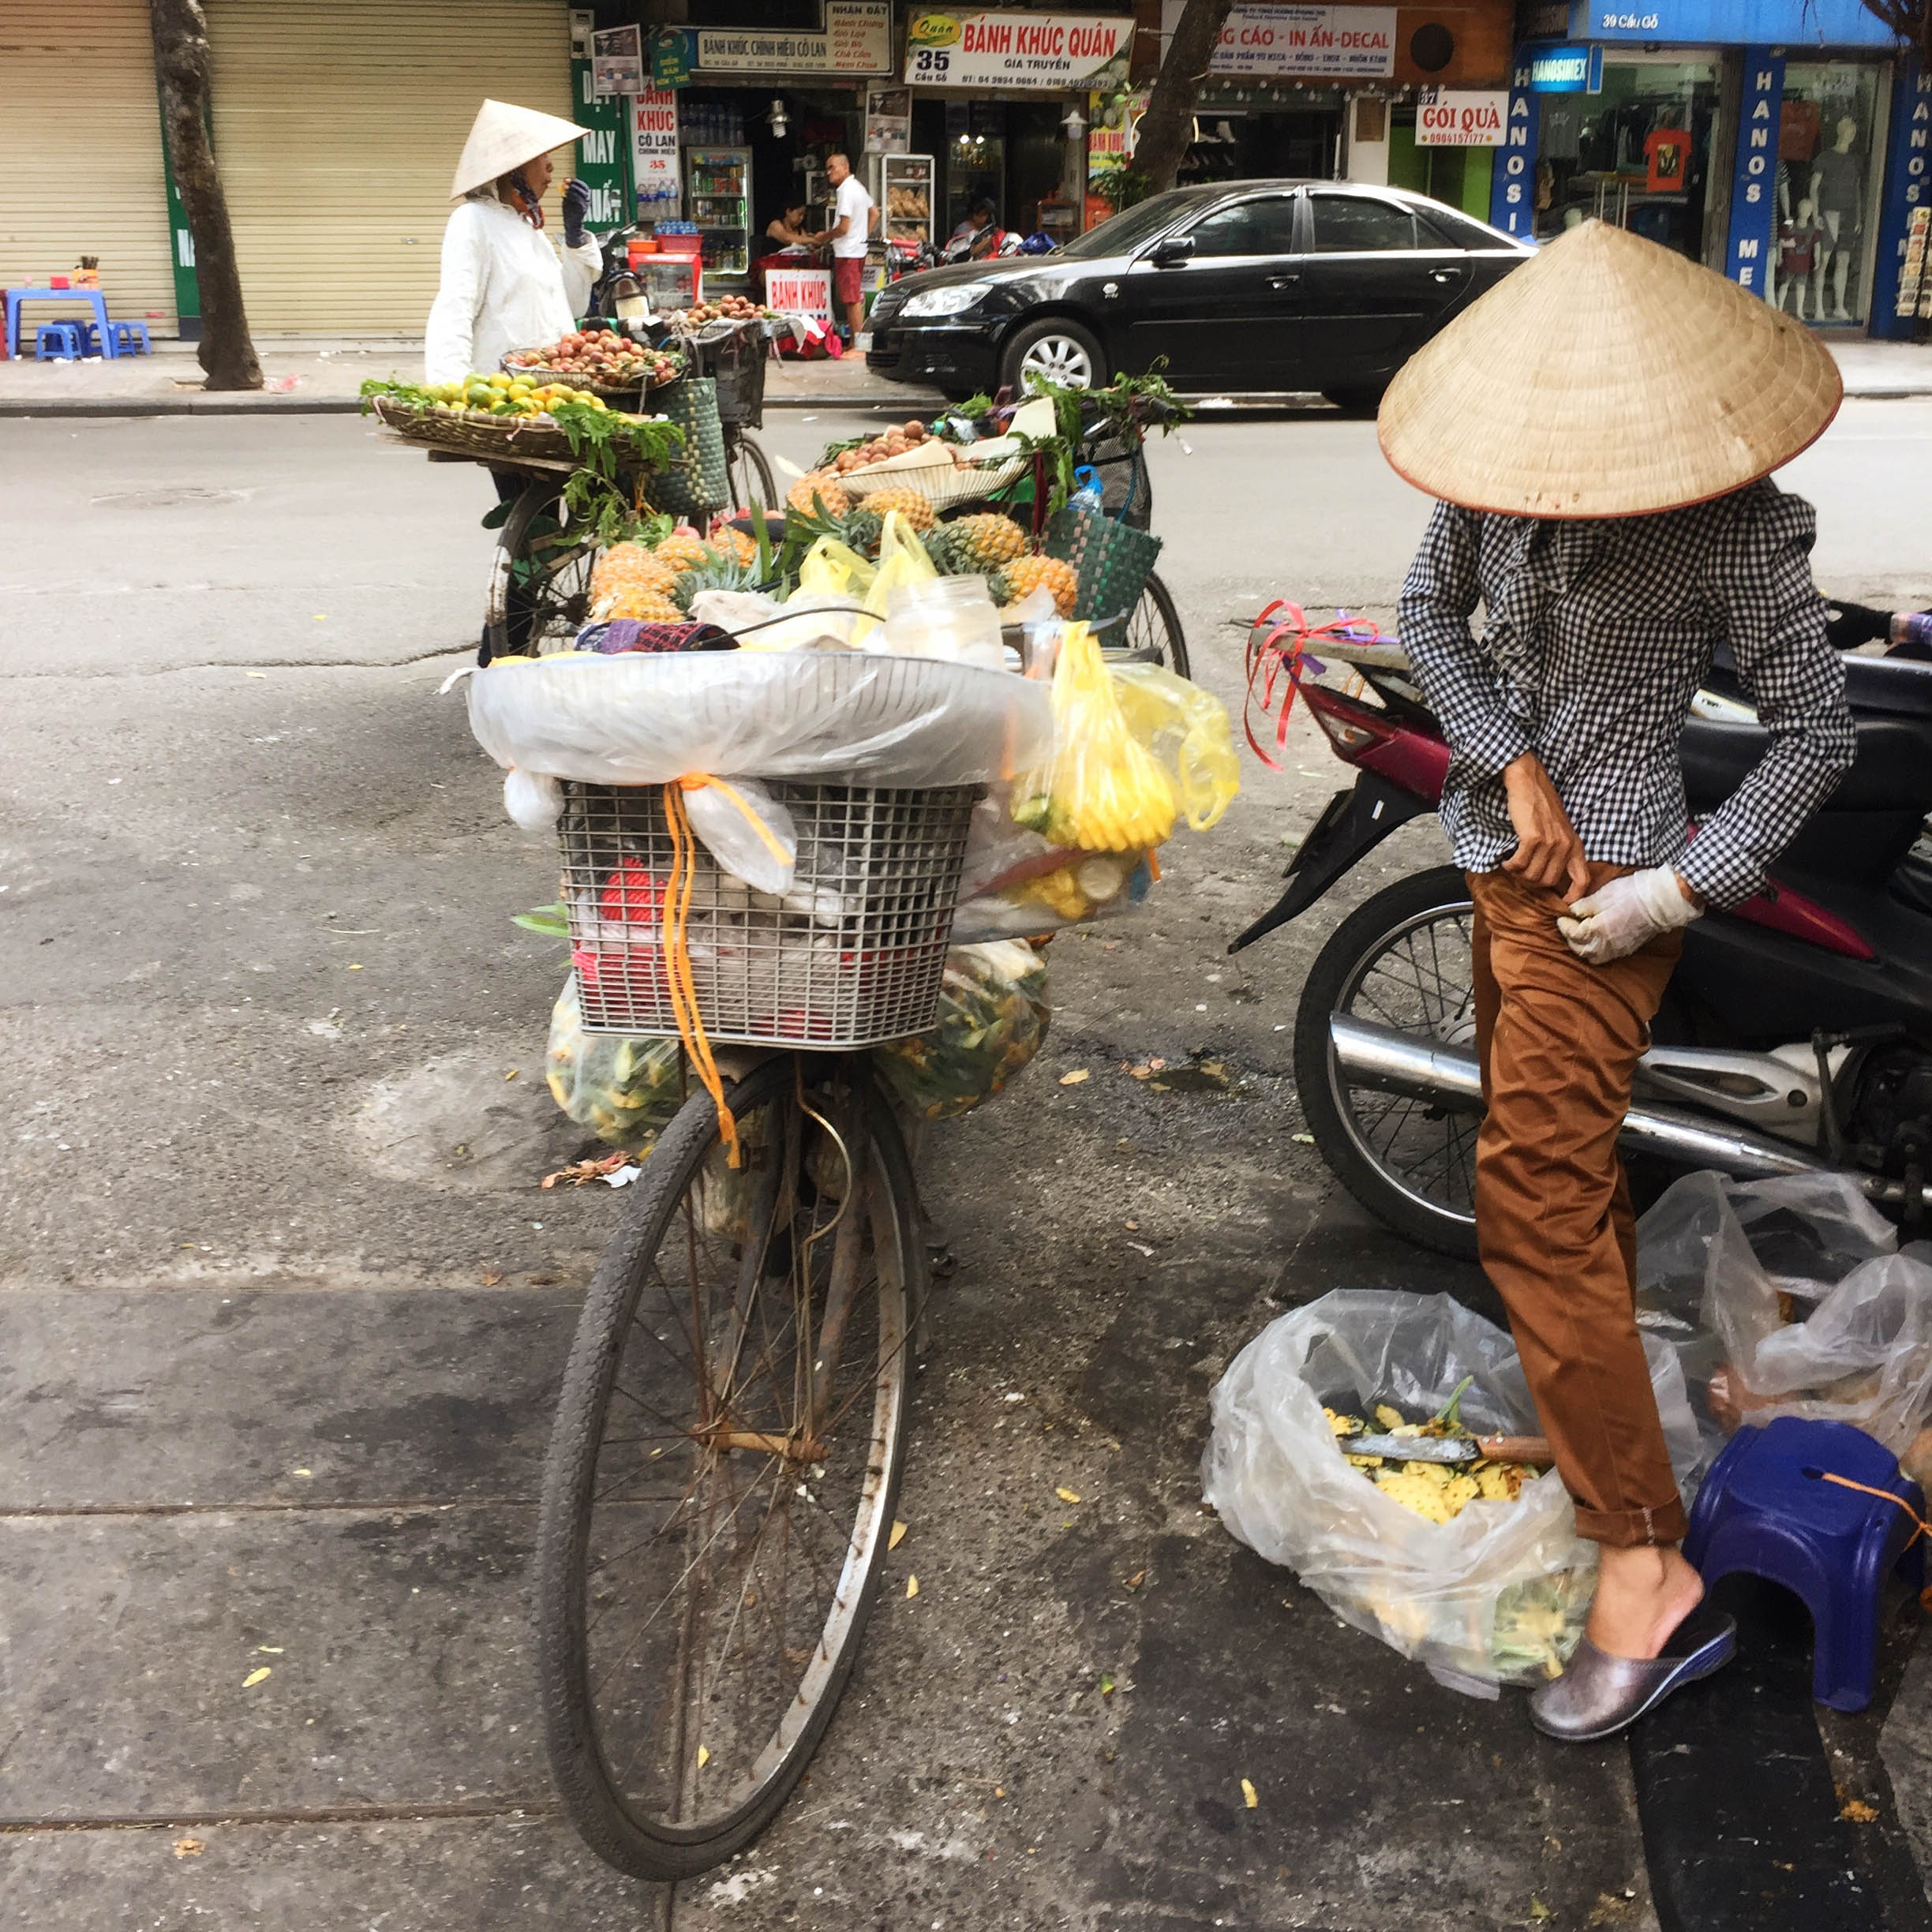 an image of the street life in Vietnam